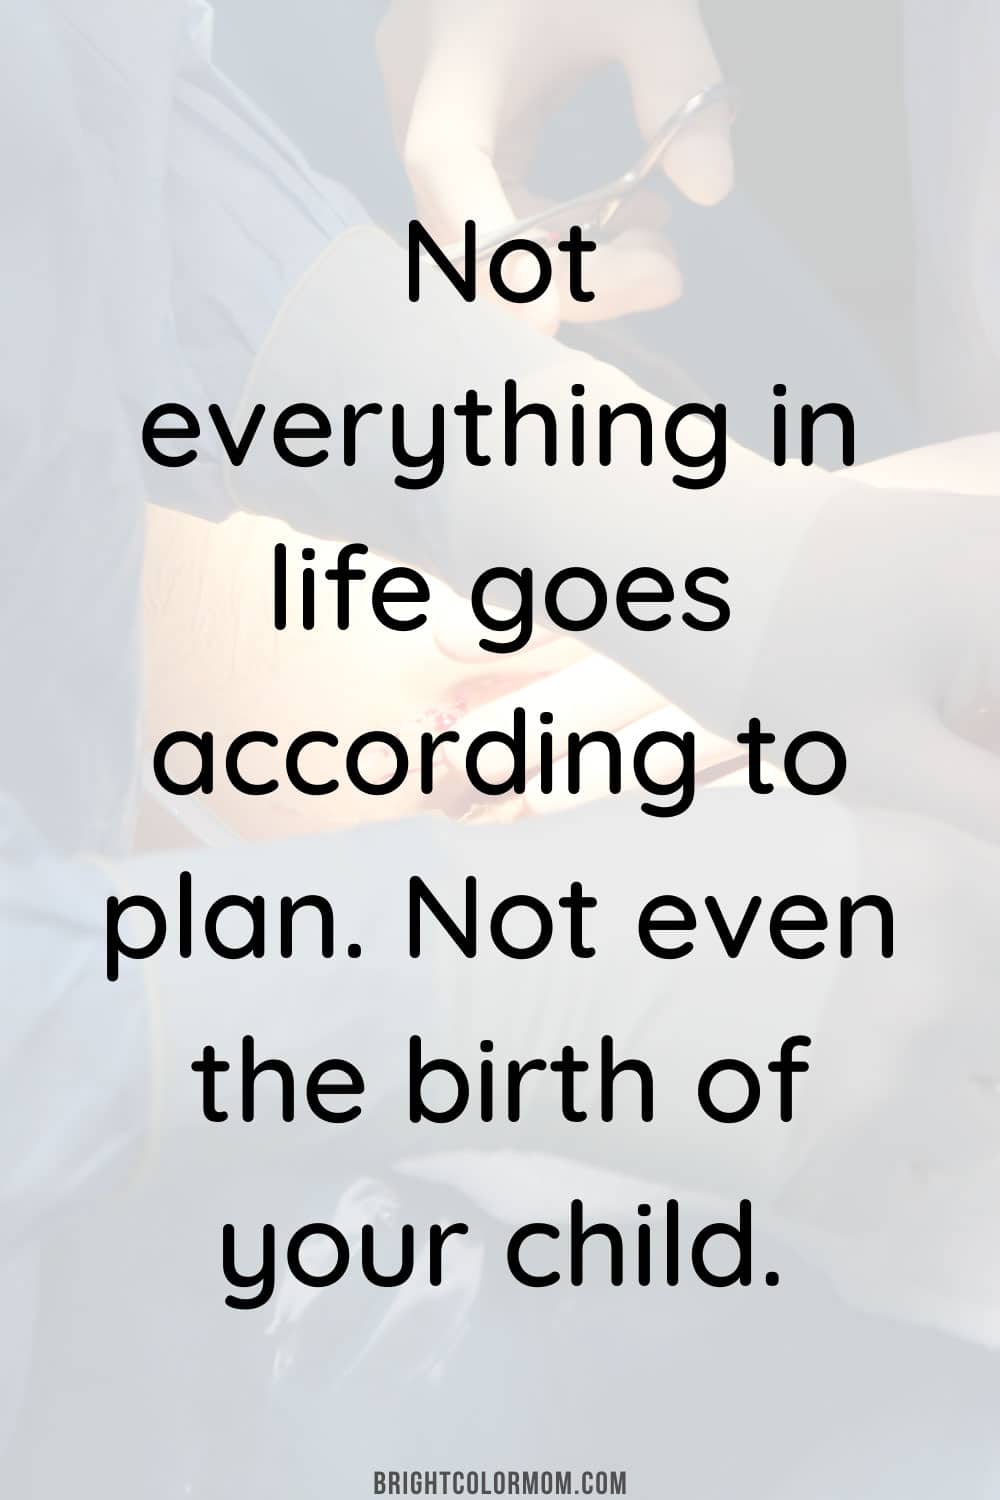 Not everything in life goes according to plan. Not even the birth of your child.